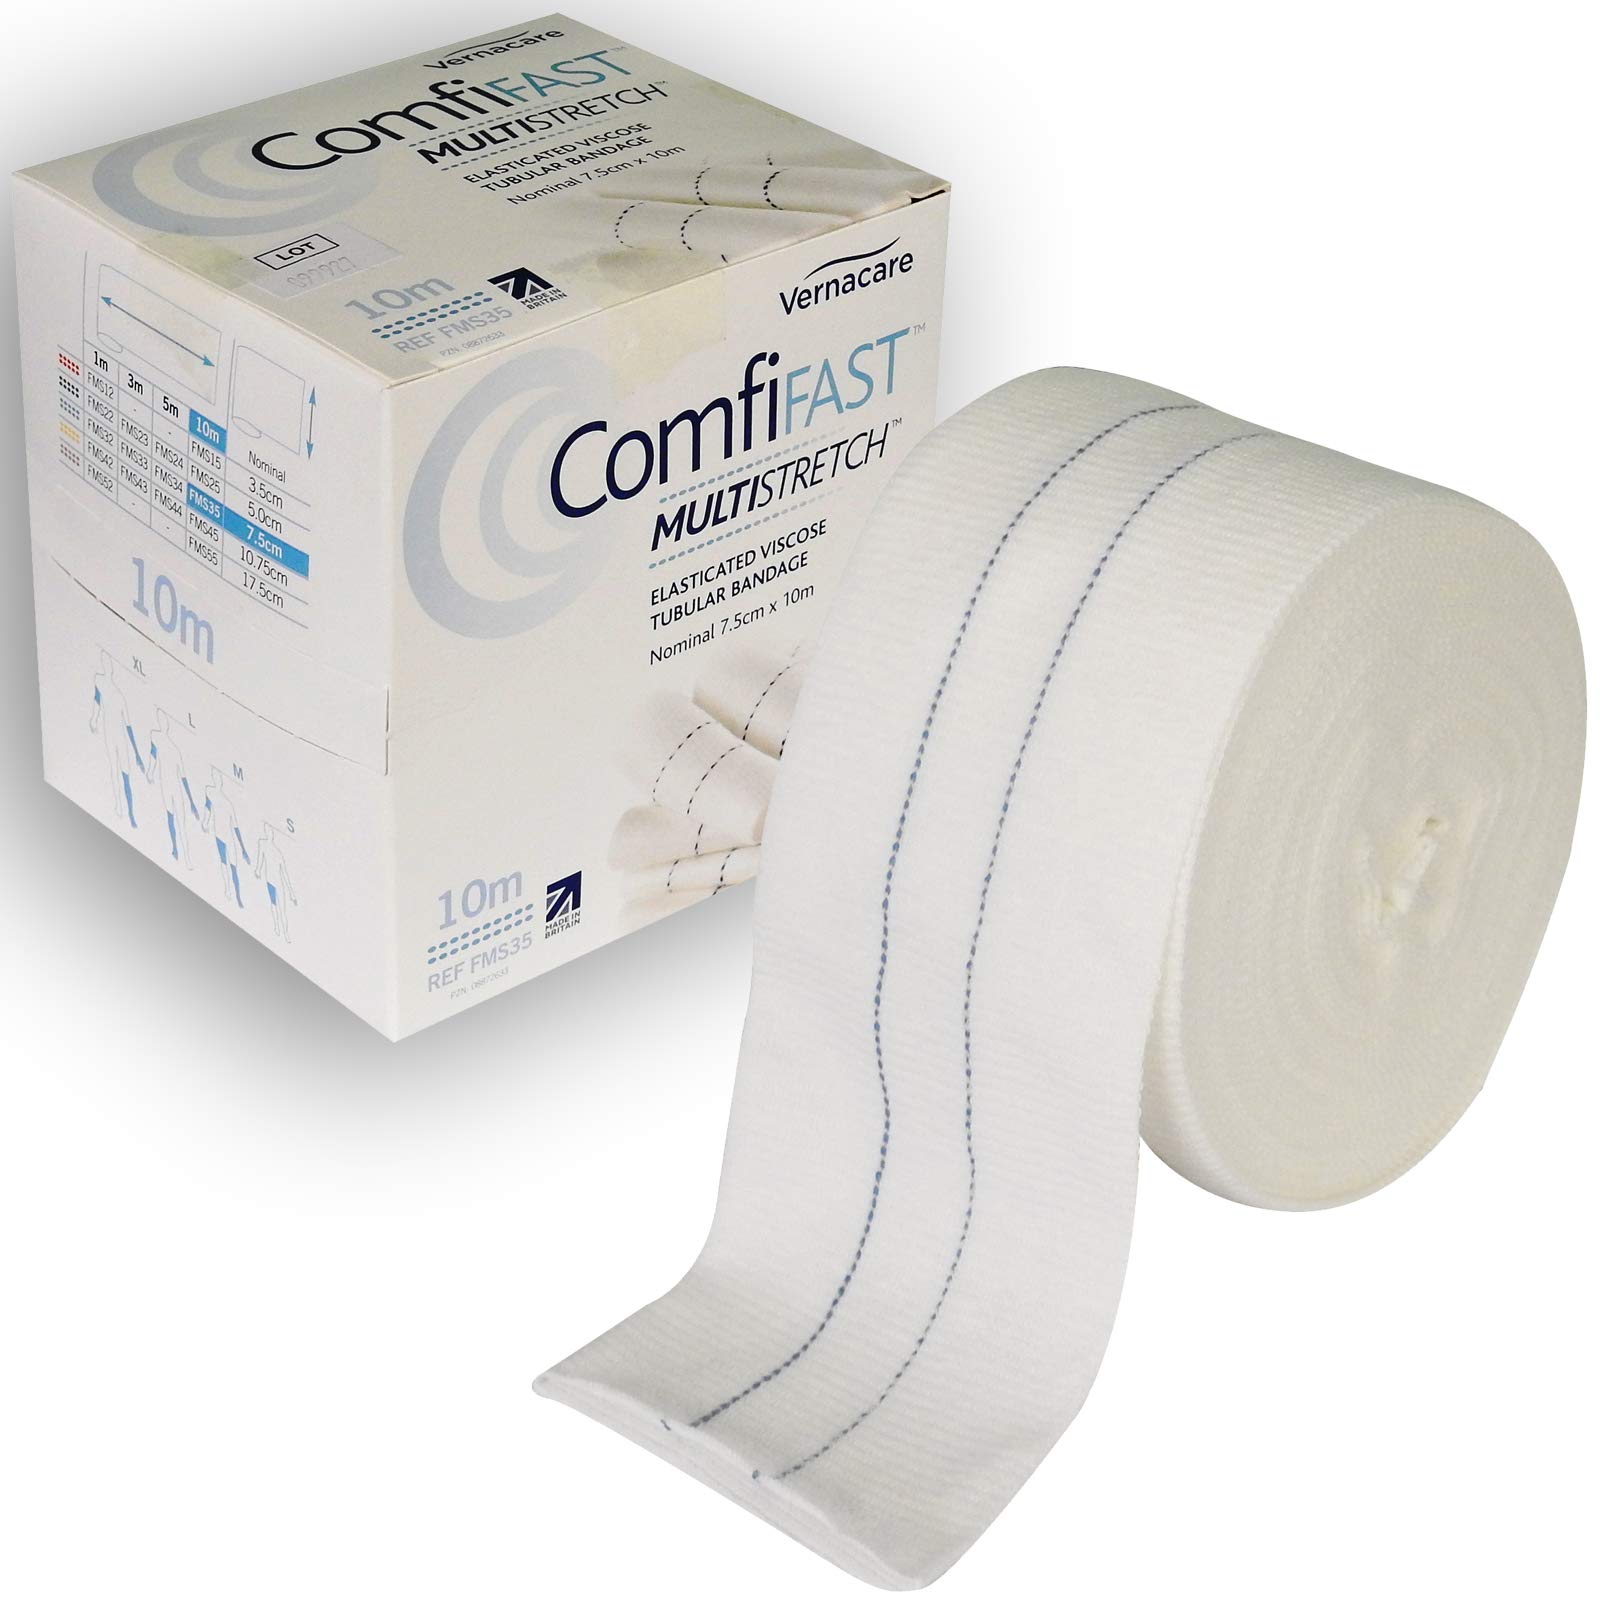 Comfifast Elasticated Multistretch Tubular Viscose Bandage - for Large Limbs, Blue Line 7.5cm (for Limb Circumference 20-45cm) - 10m Roll